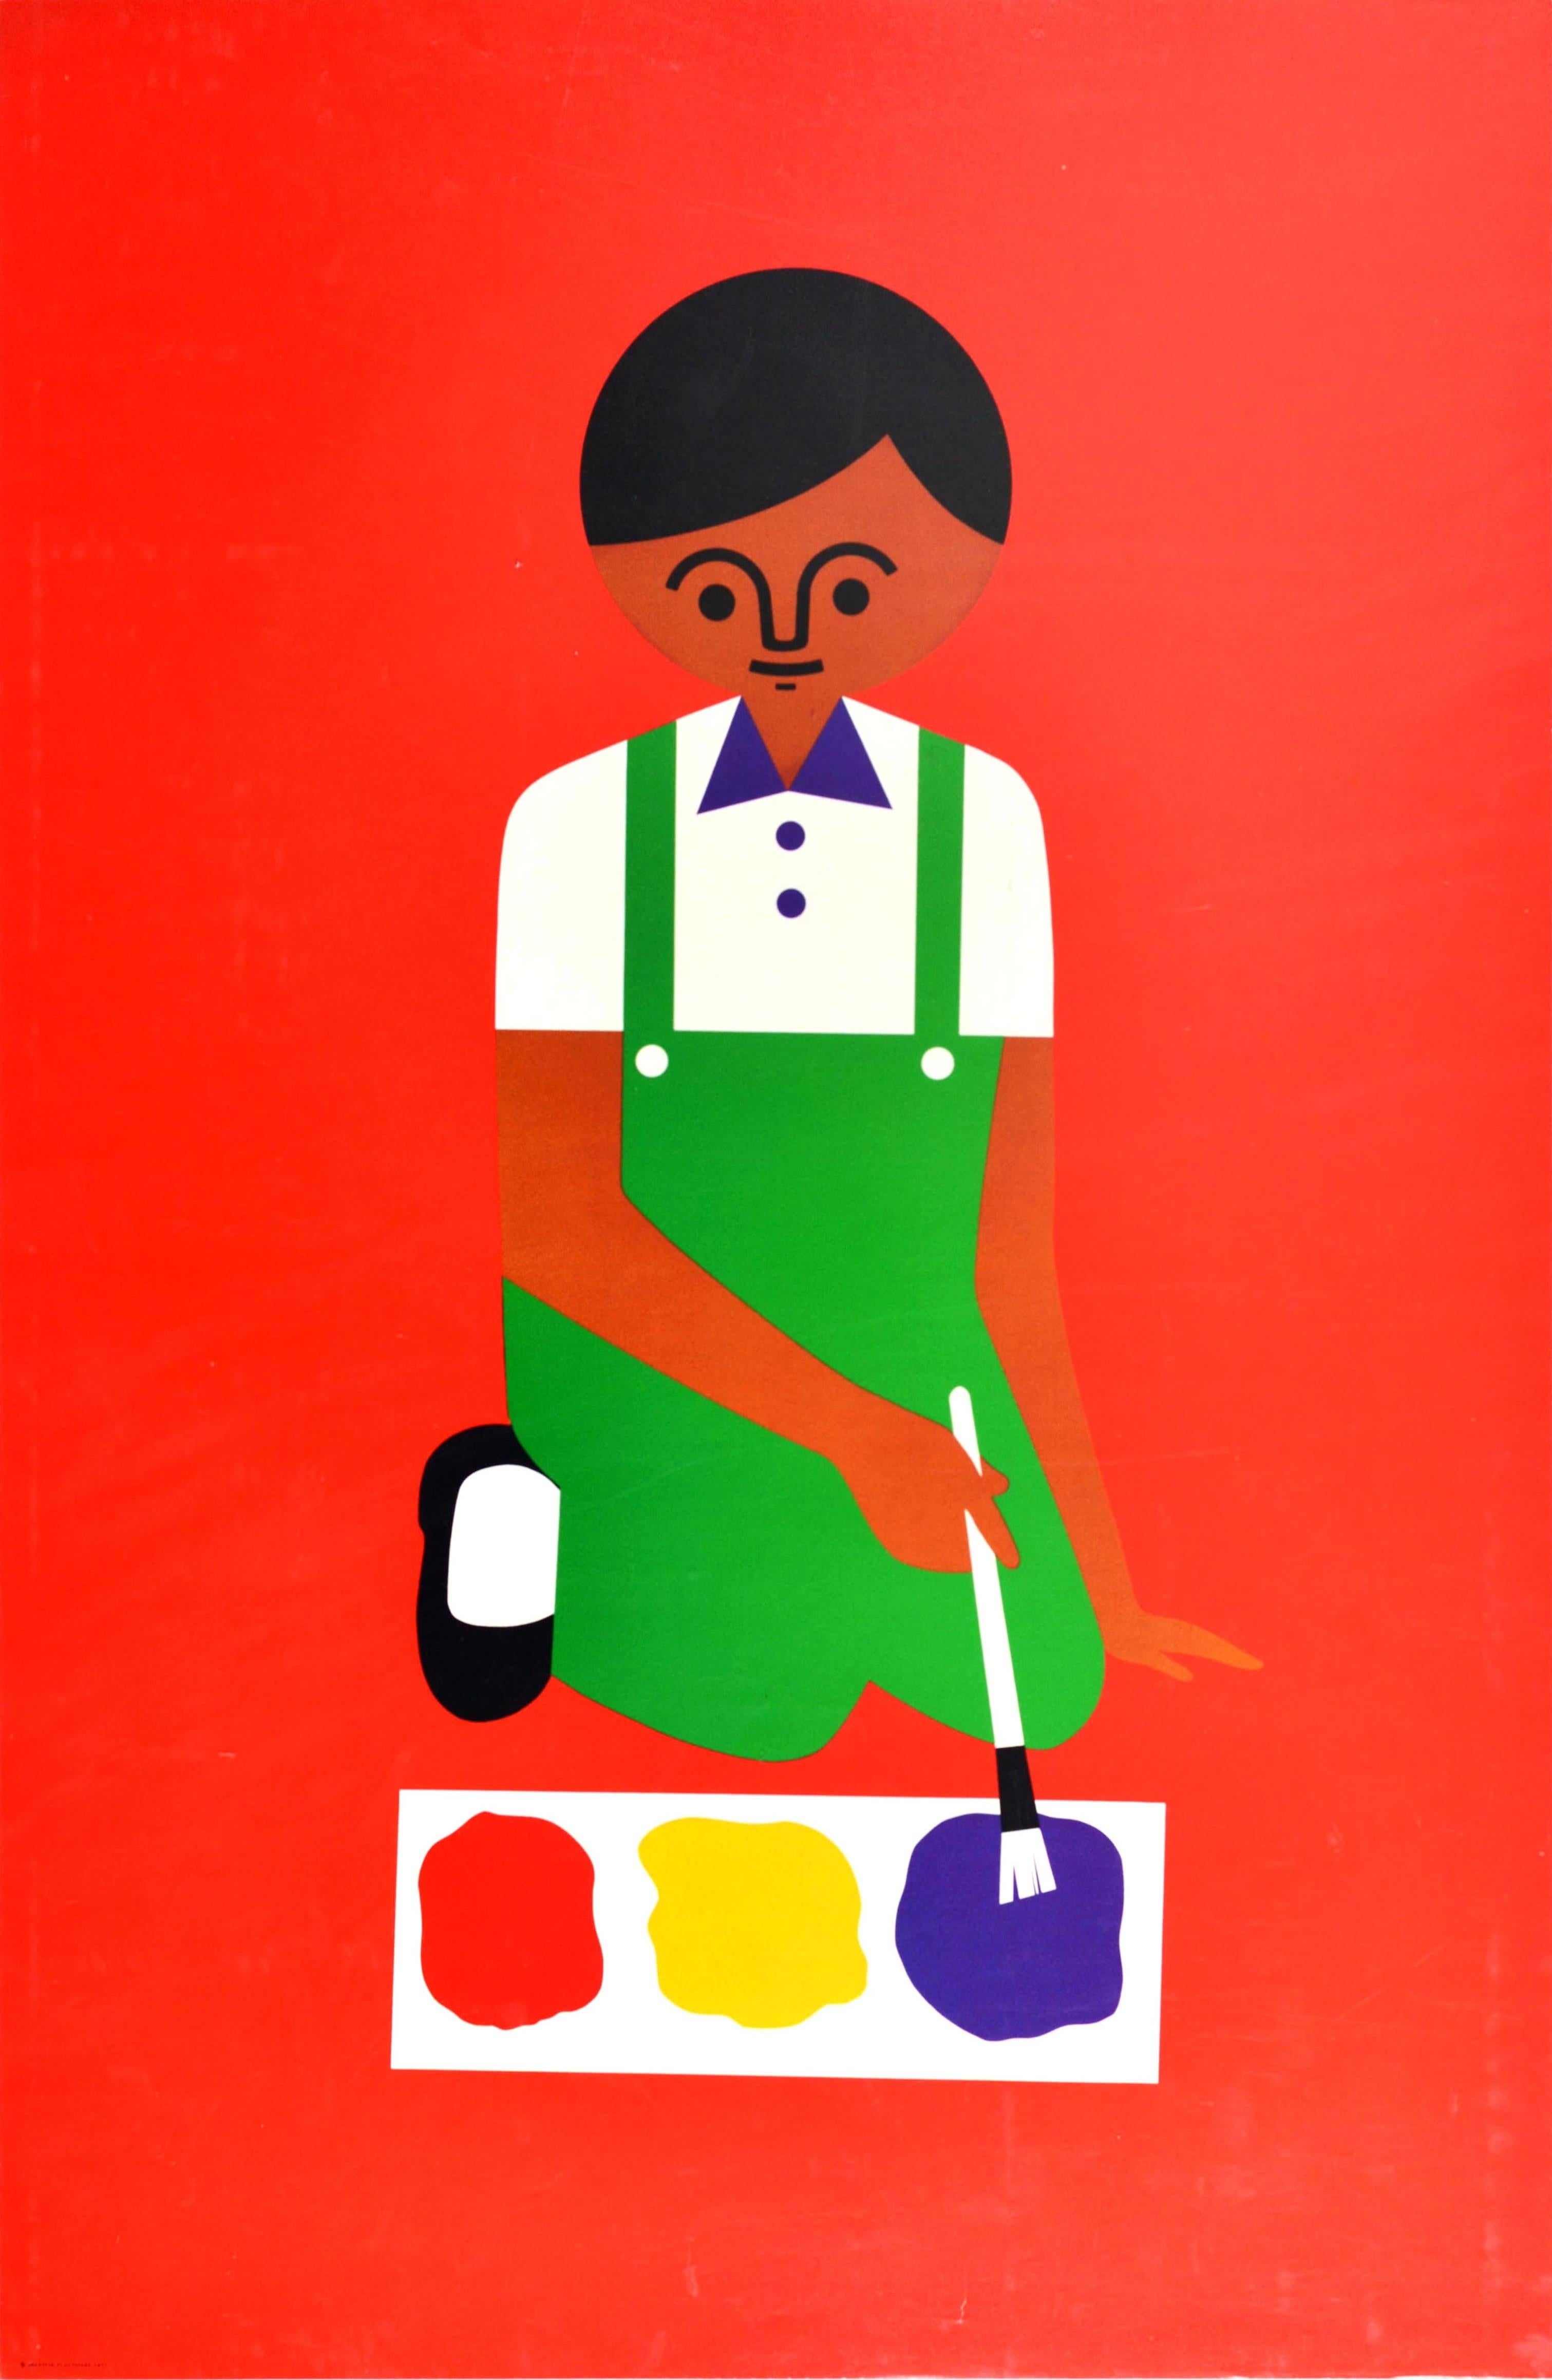 Original vintage advertising poster for the Creative Playthings educational toy shop in Manhattan New York featuring a fun and colourful graphic design by the South African toymaker and illustrator Fredun Shapur (b. 1929), showing a child in green